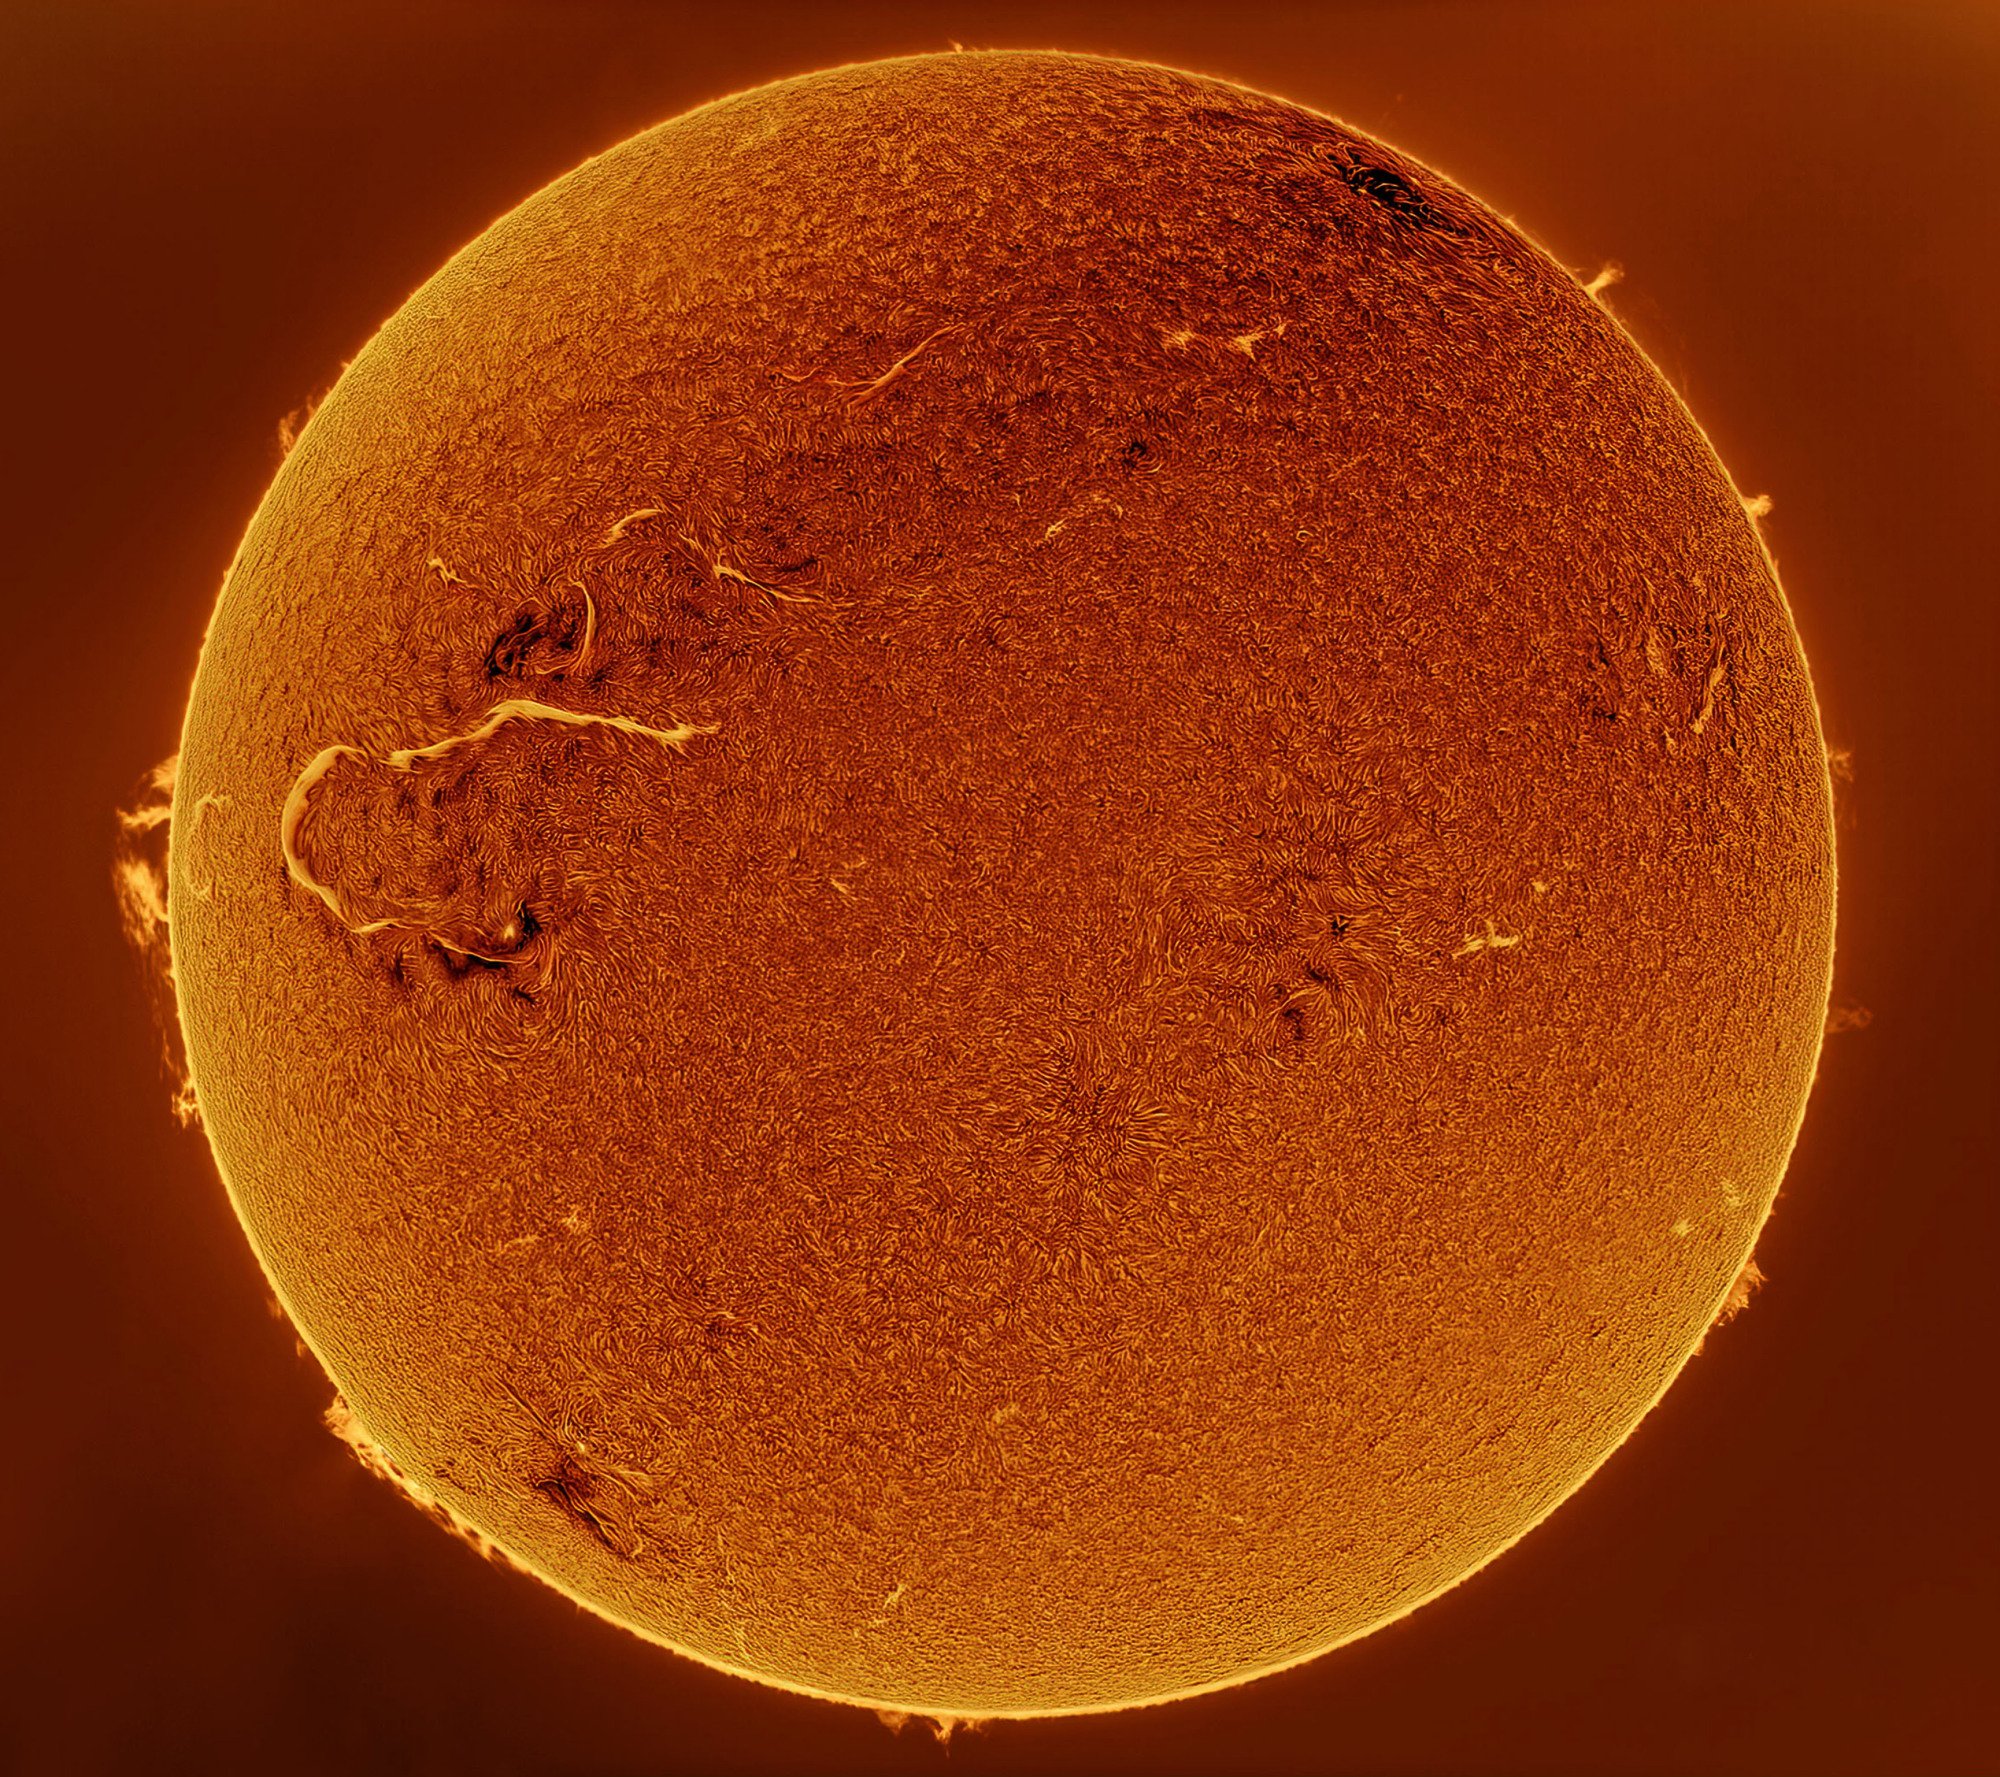 An image of the sun.